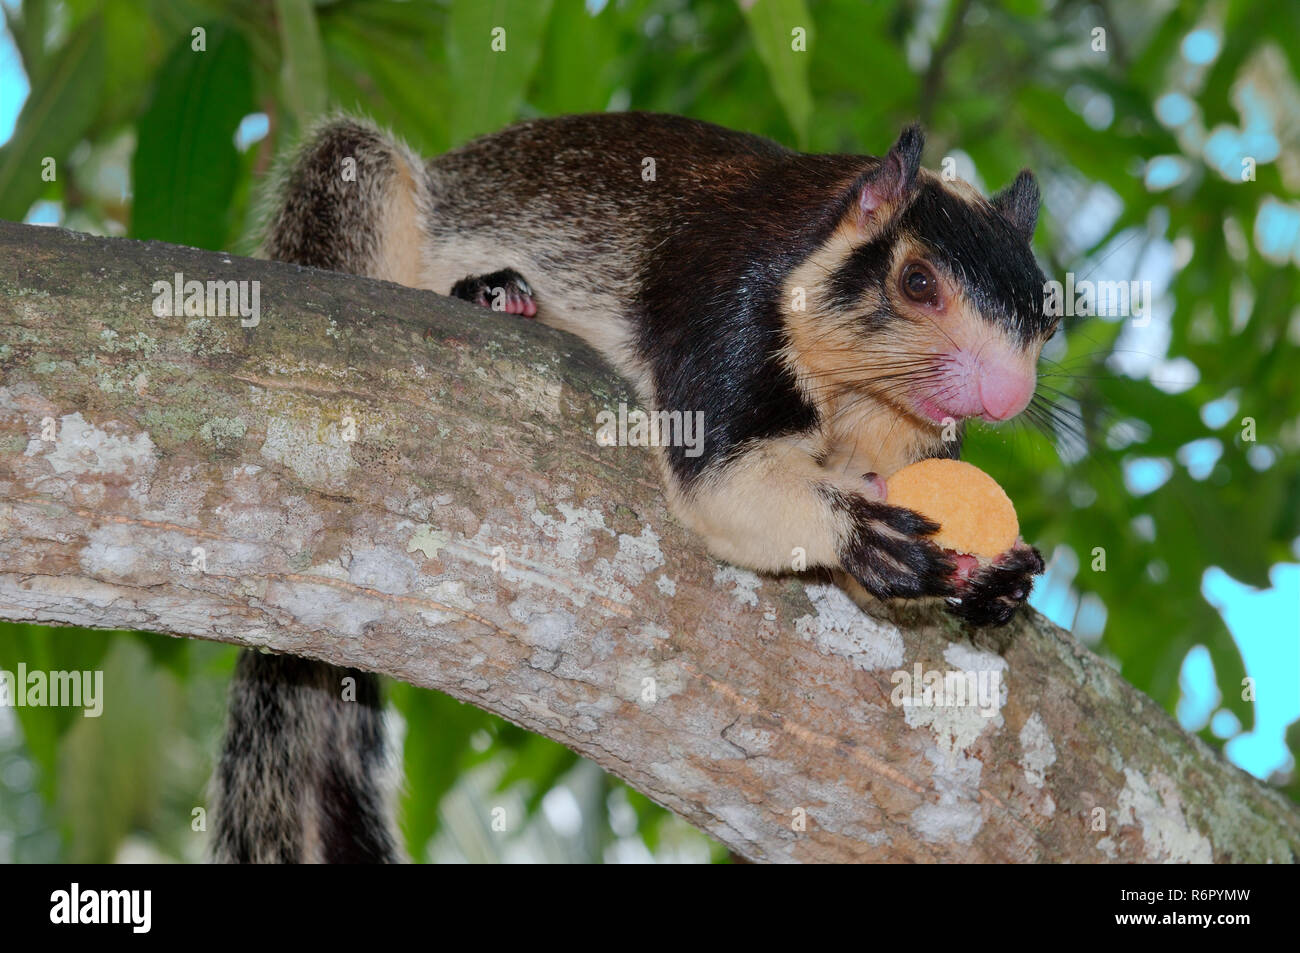 Indian giant squirrel or Malabar giant squirrel (Ratufa indica) He is sitting on a branch and holds in paws cookies, Hikkaduwa, Sri Lanka, South Asia Stock Photo